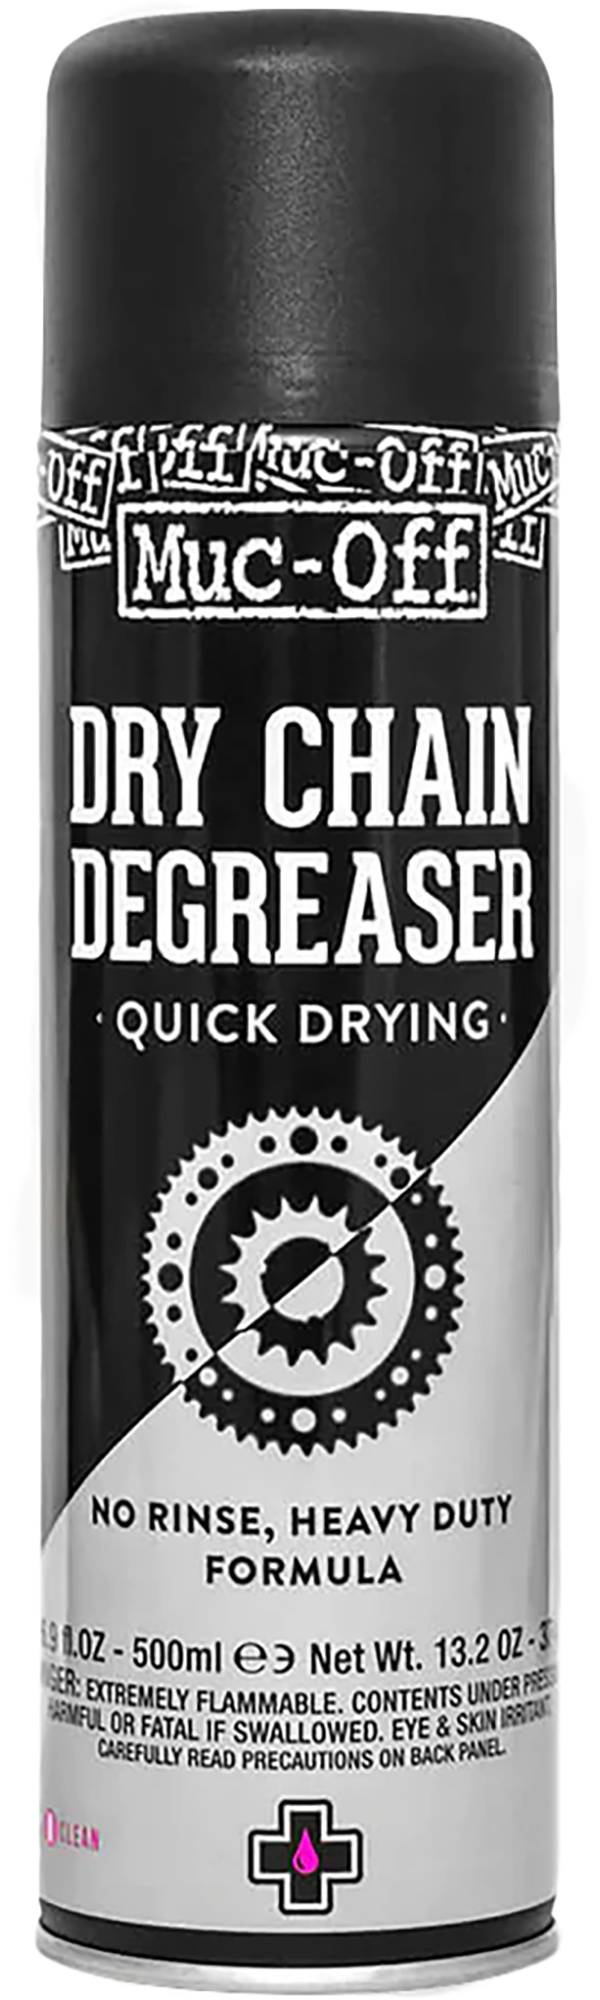 Muc-Off Dry Chain Degreaser product image